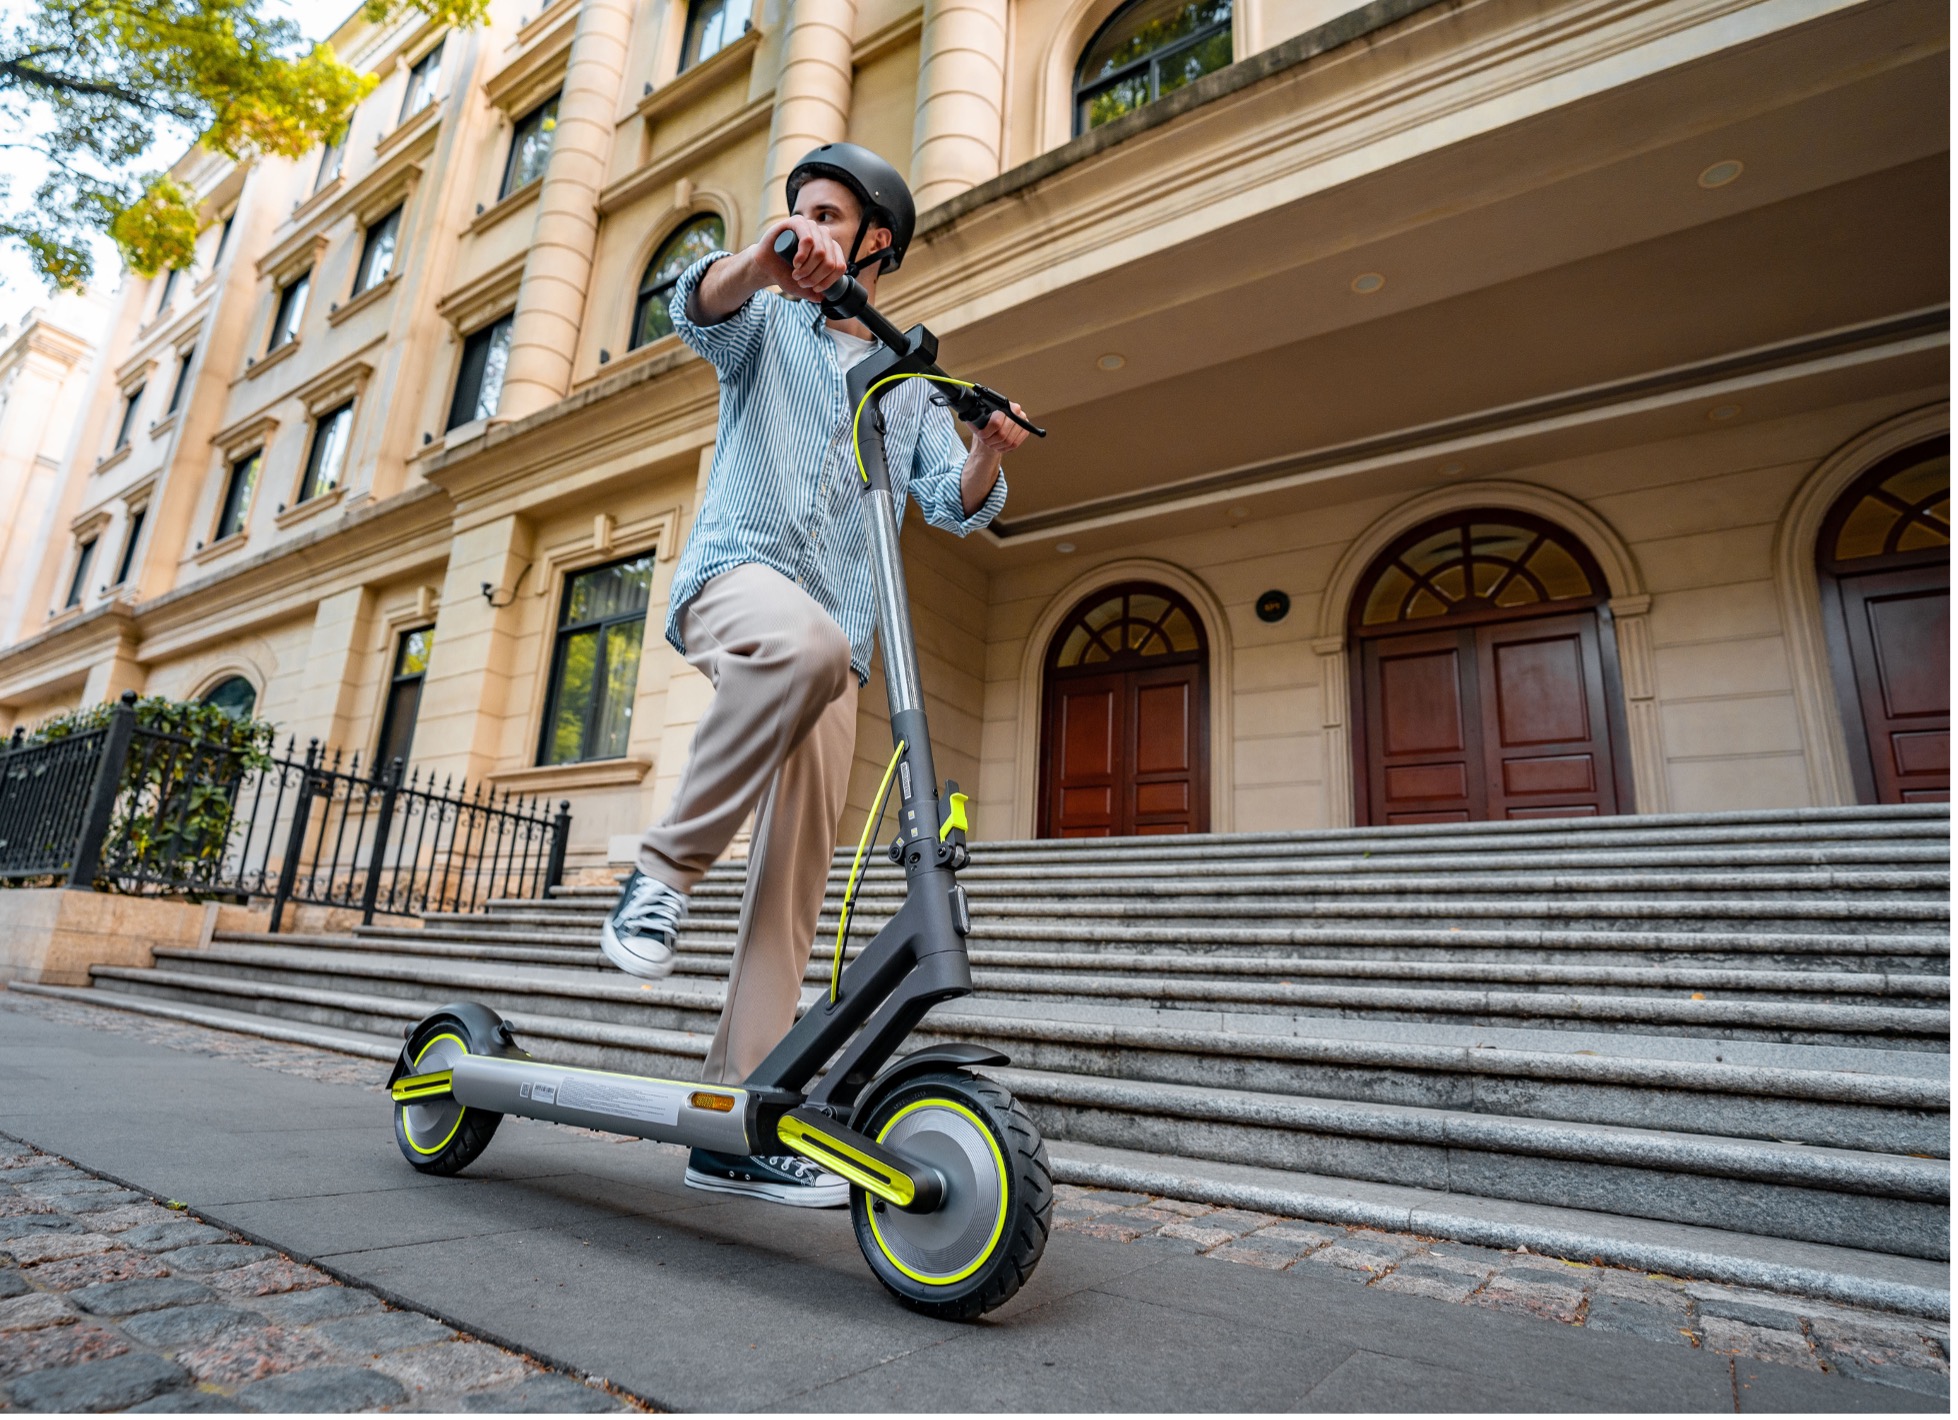 NAVEE e-mobility innovations redefine urban commute in the U.S.